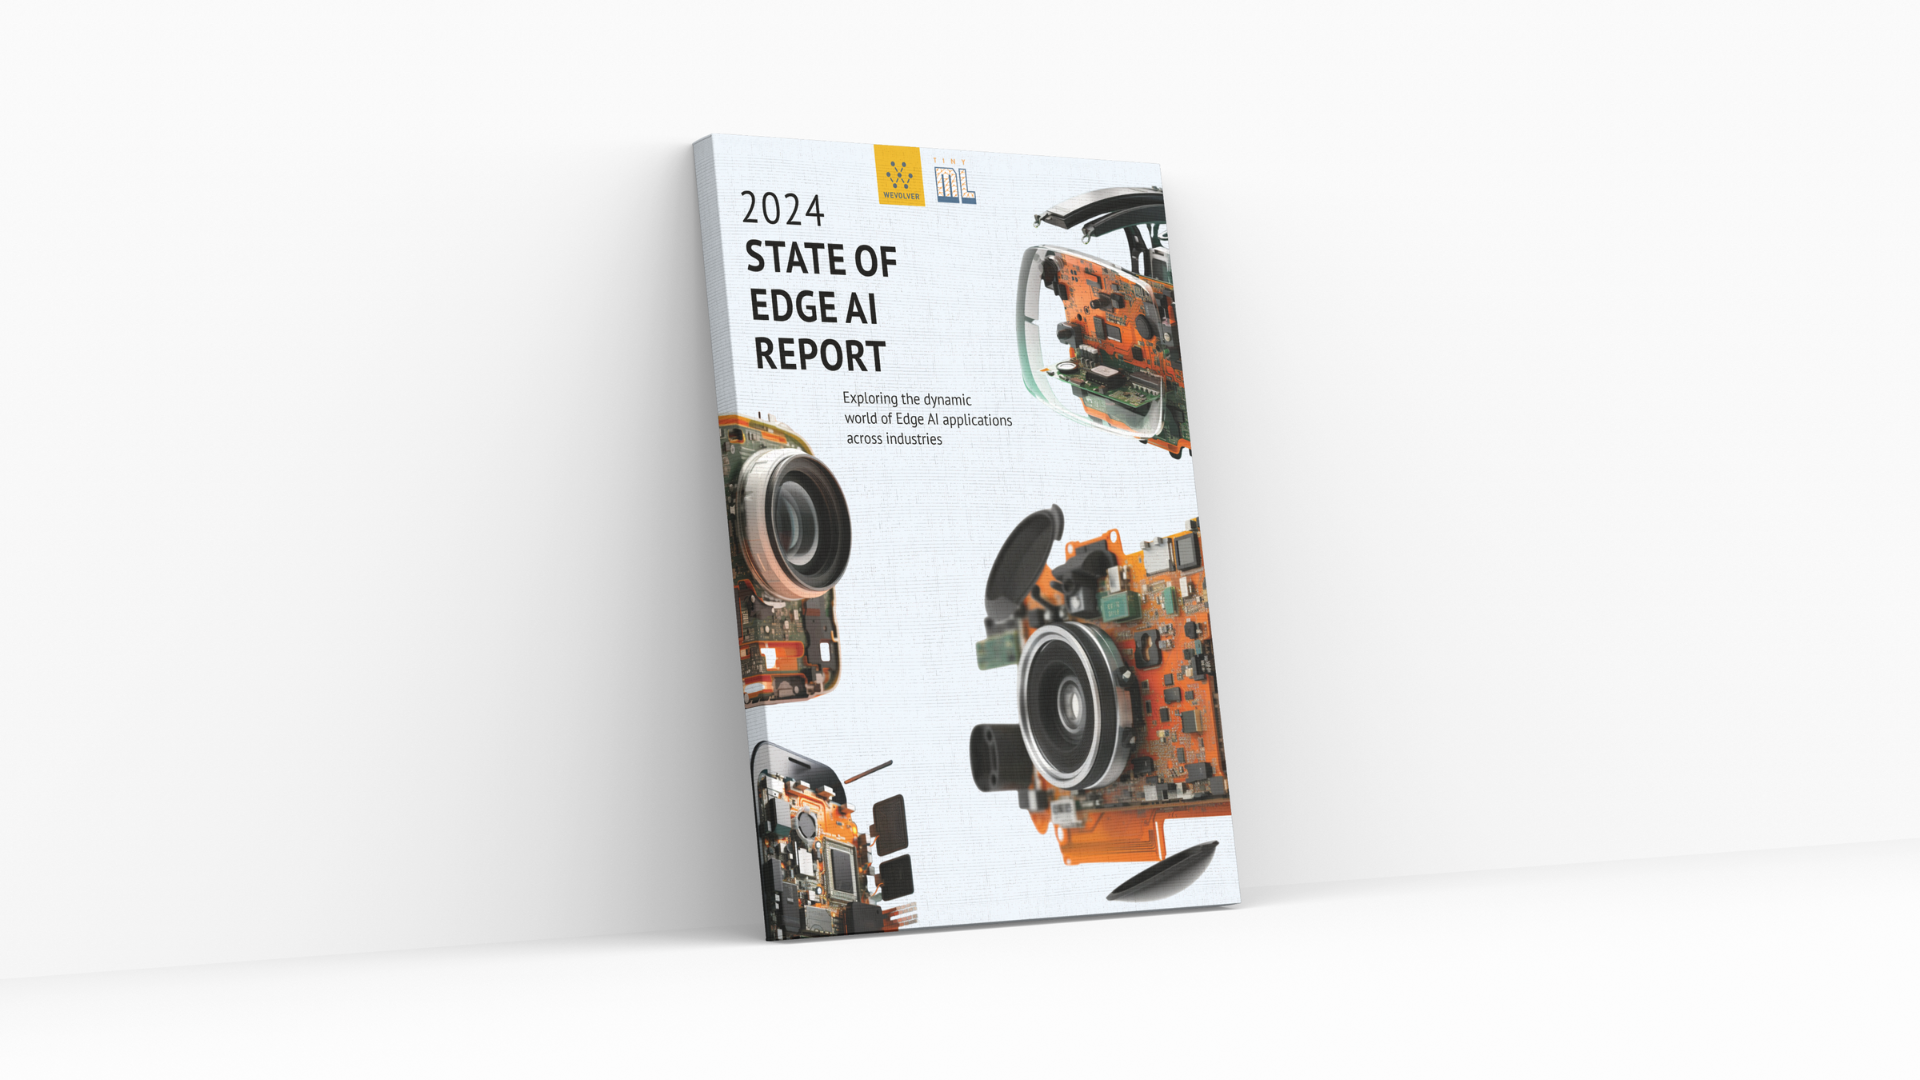 Arduino featured in the 2024 State of the Edge AI Report